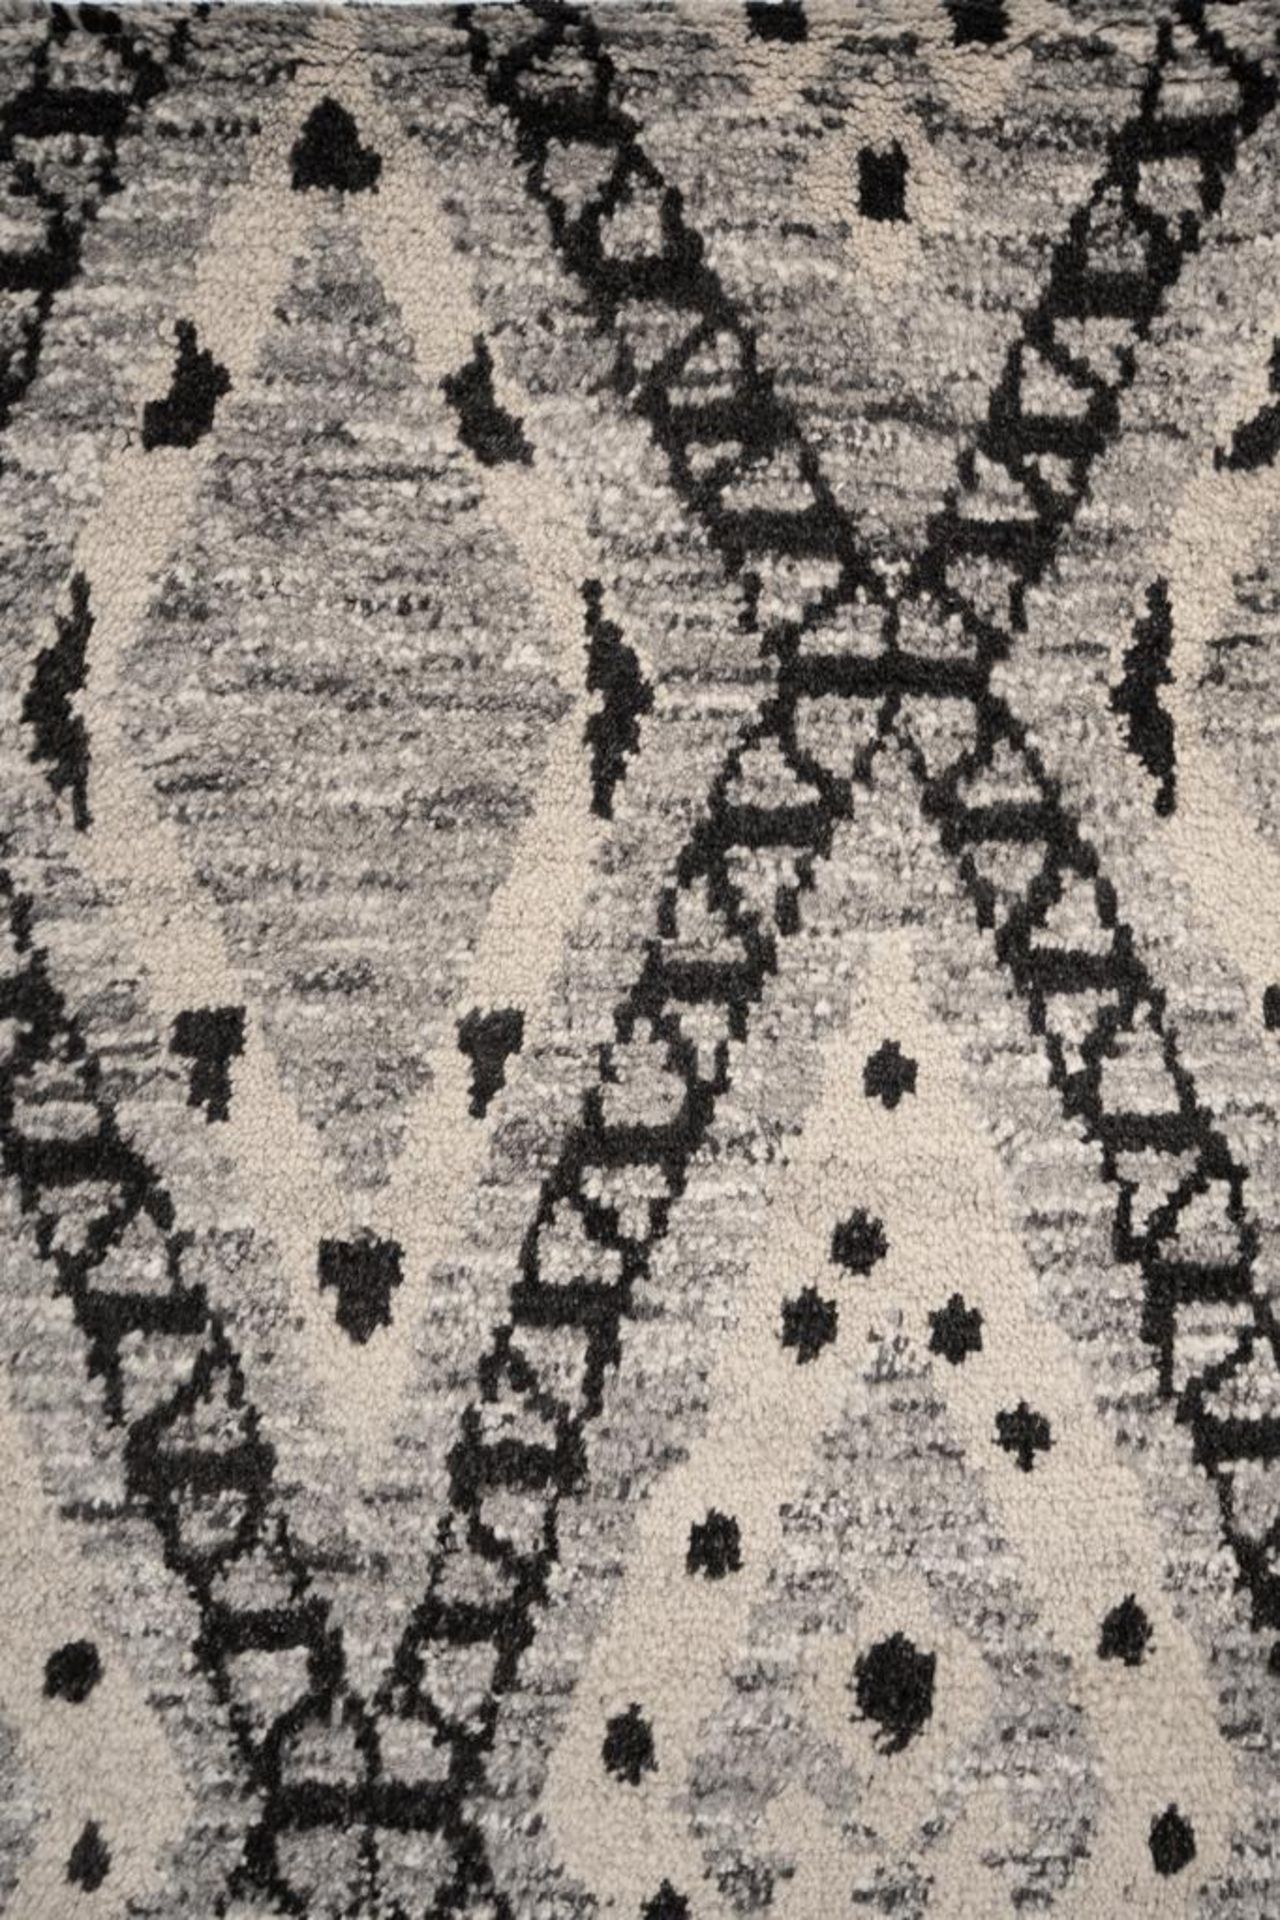 Brown Diamond Rug 207 x 250cm: A gorgeous Moroccan inspired floor rug. - Image 2 of 4